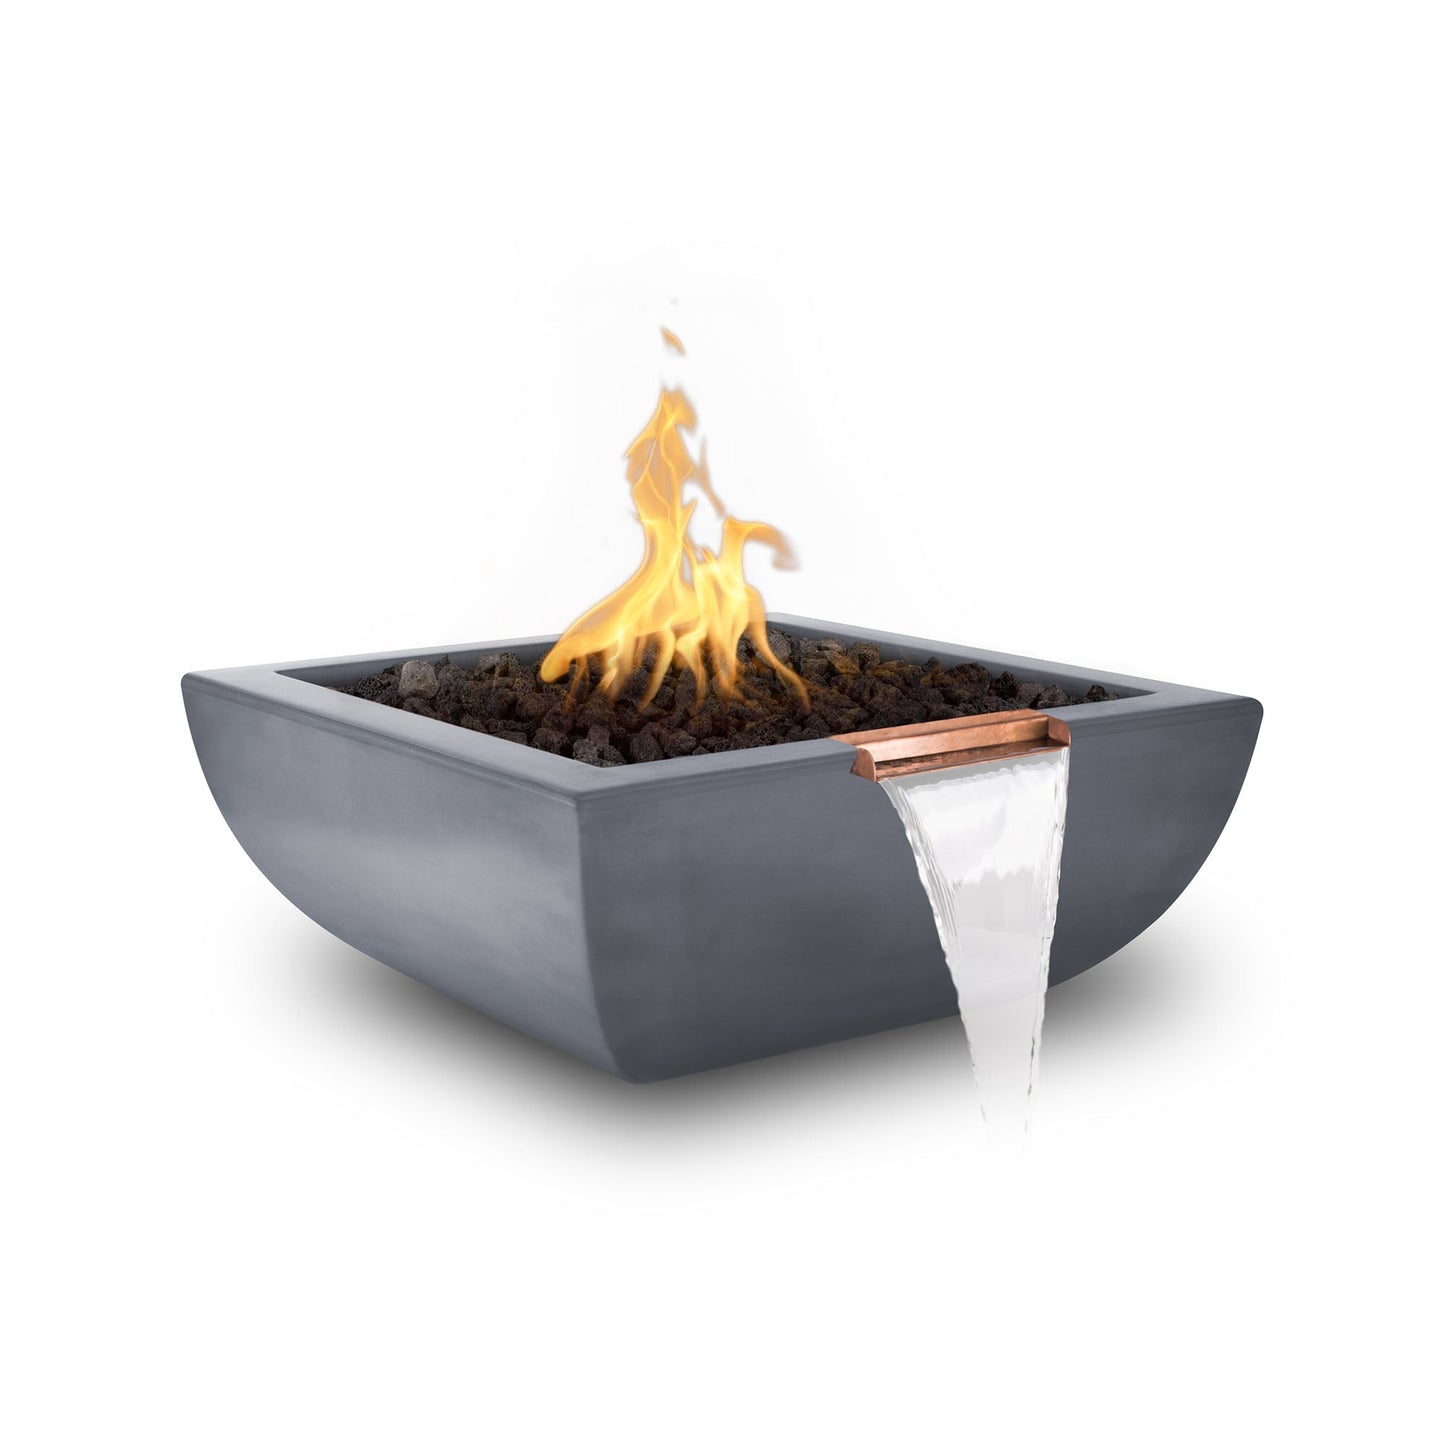 The Outdoor Plus Square Avalon 30" Metallic Silver GFRC Concrete Natural Gas Fire & Water Bowl with Match Lit with Flame Sense Ignition